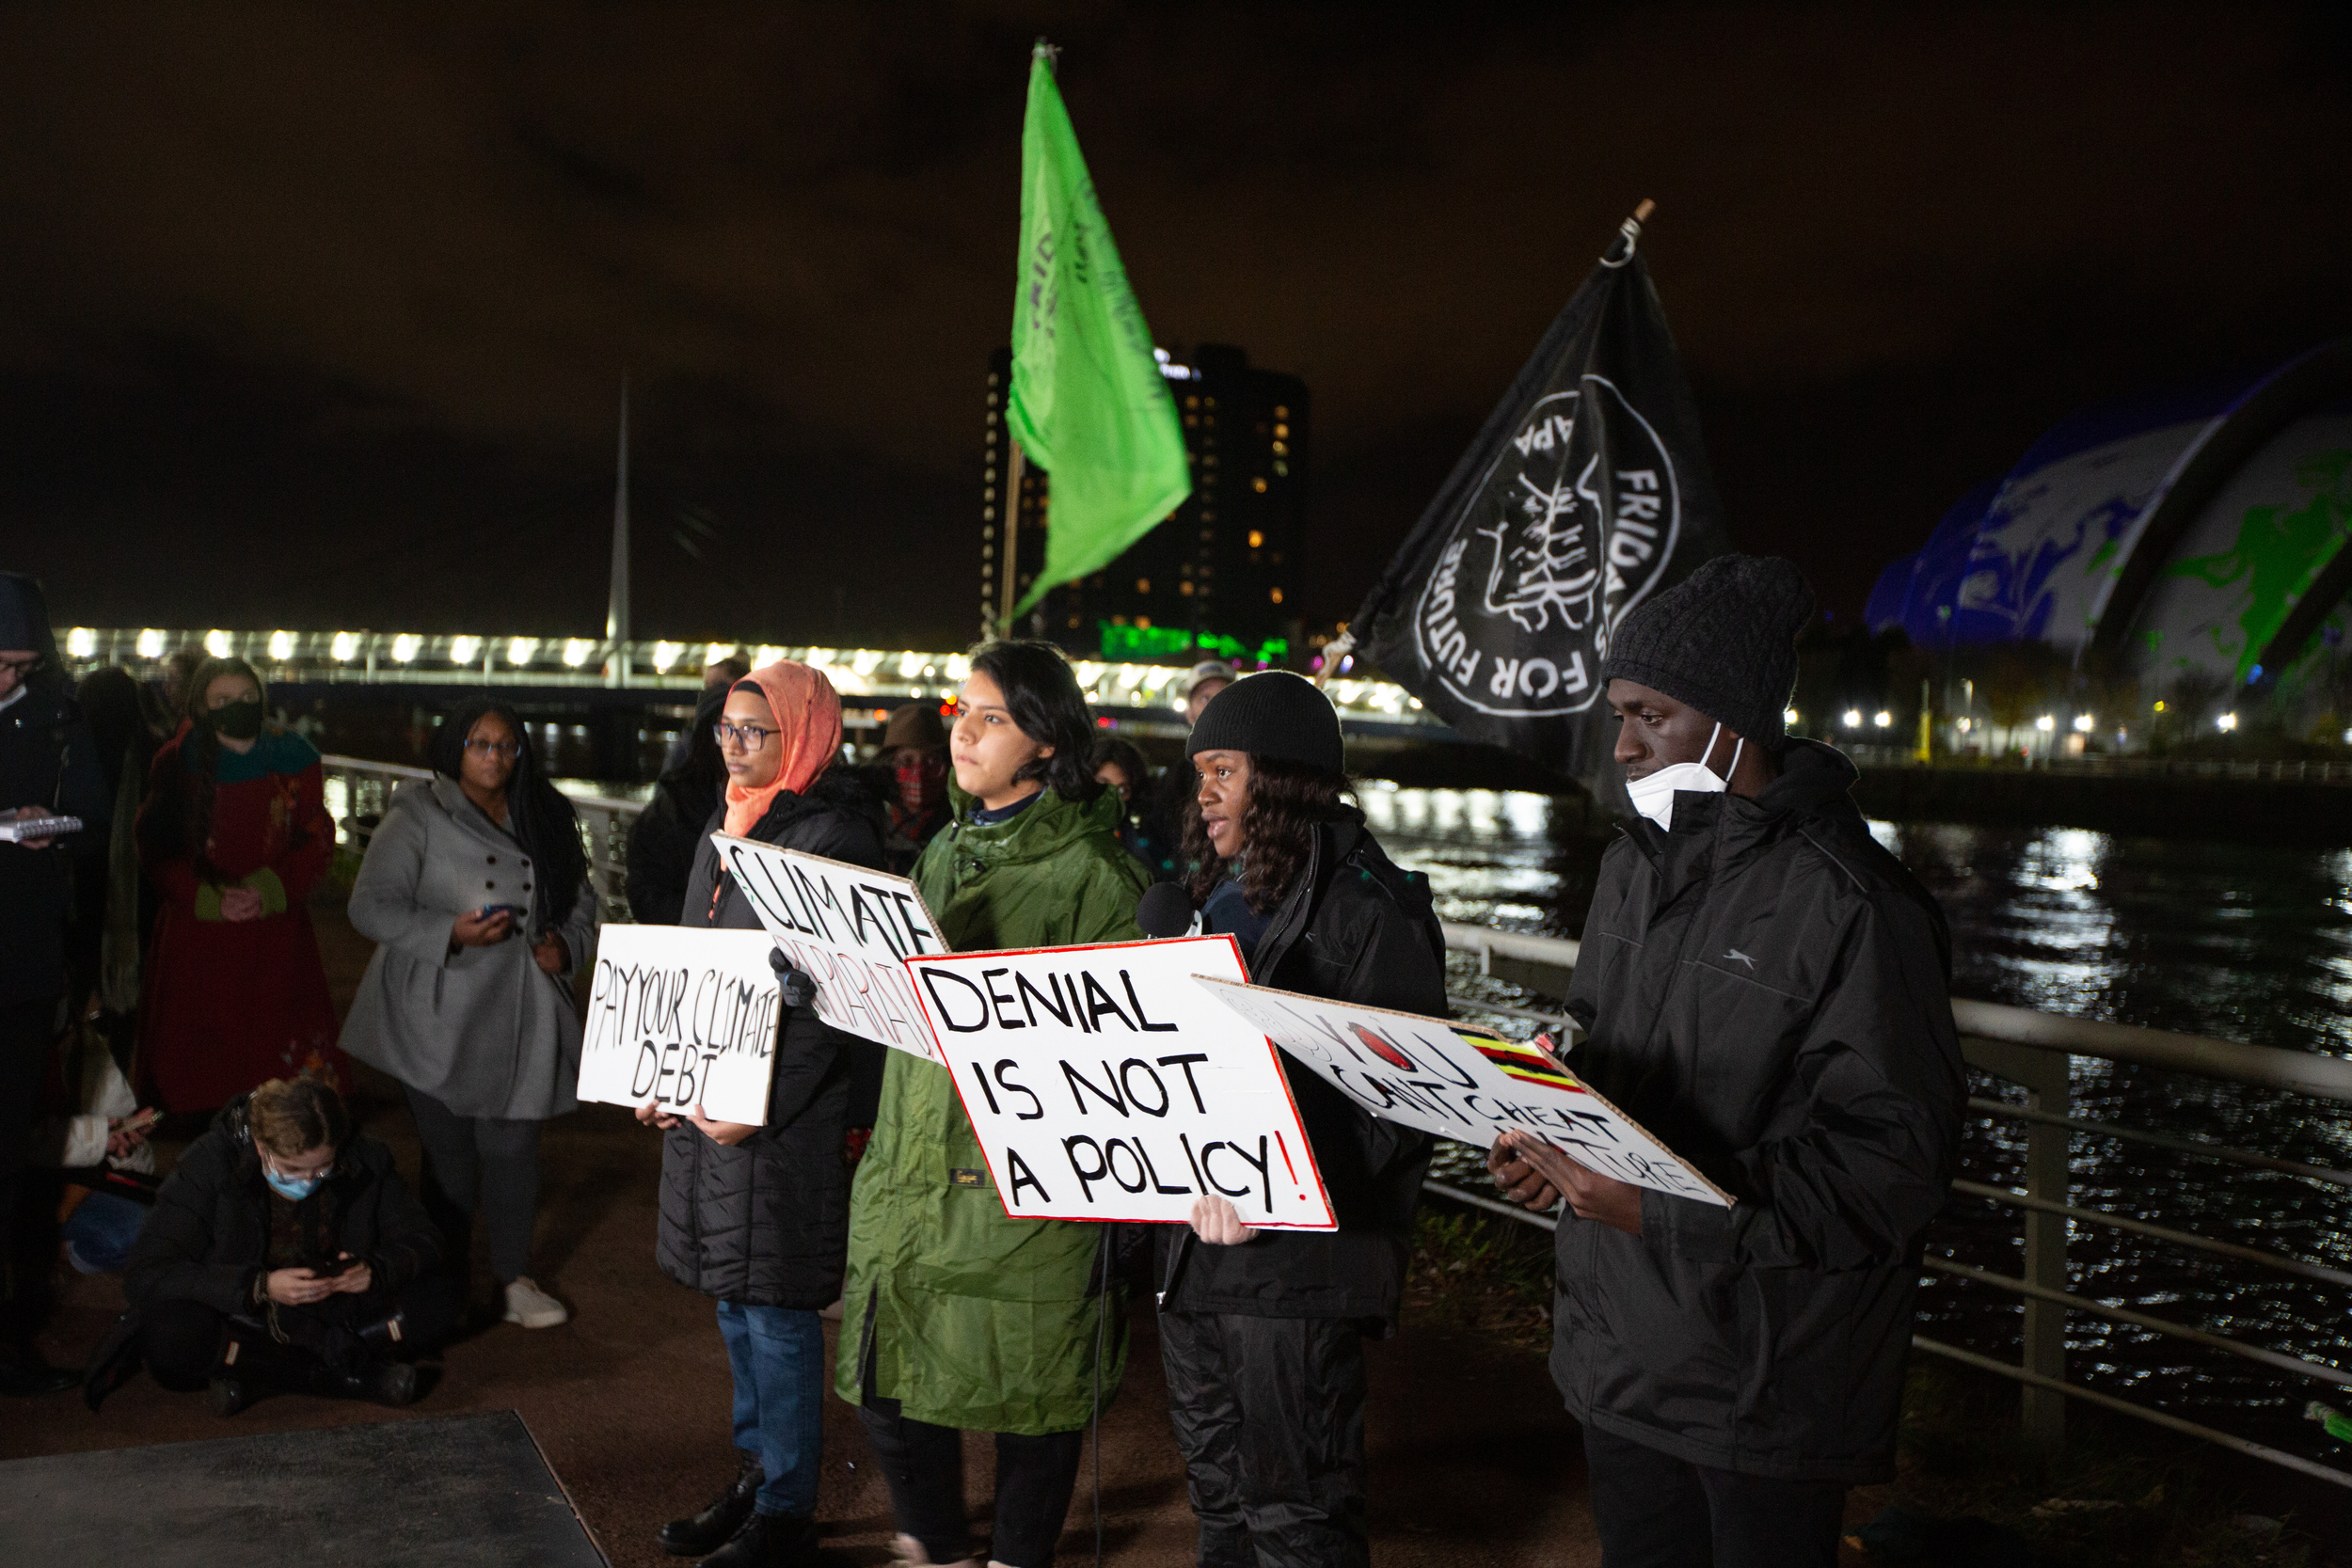 Four young people of colour stand with their backs to the water in a city dockside at night time. Two are Black, and two have light brown skin. One wears a headscarf. They hold placards with slogans including 'Denial is not a policy' and 'Pay your climate debt'.